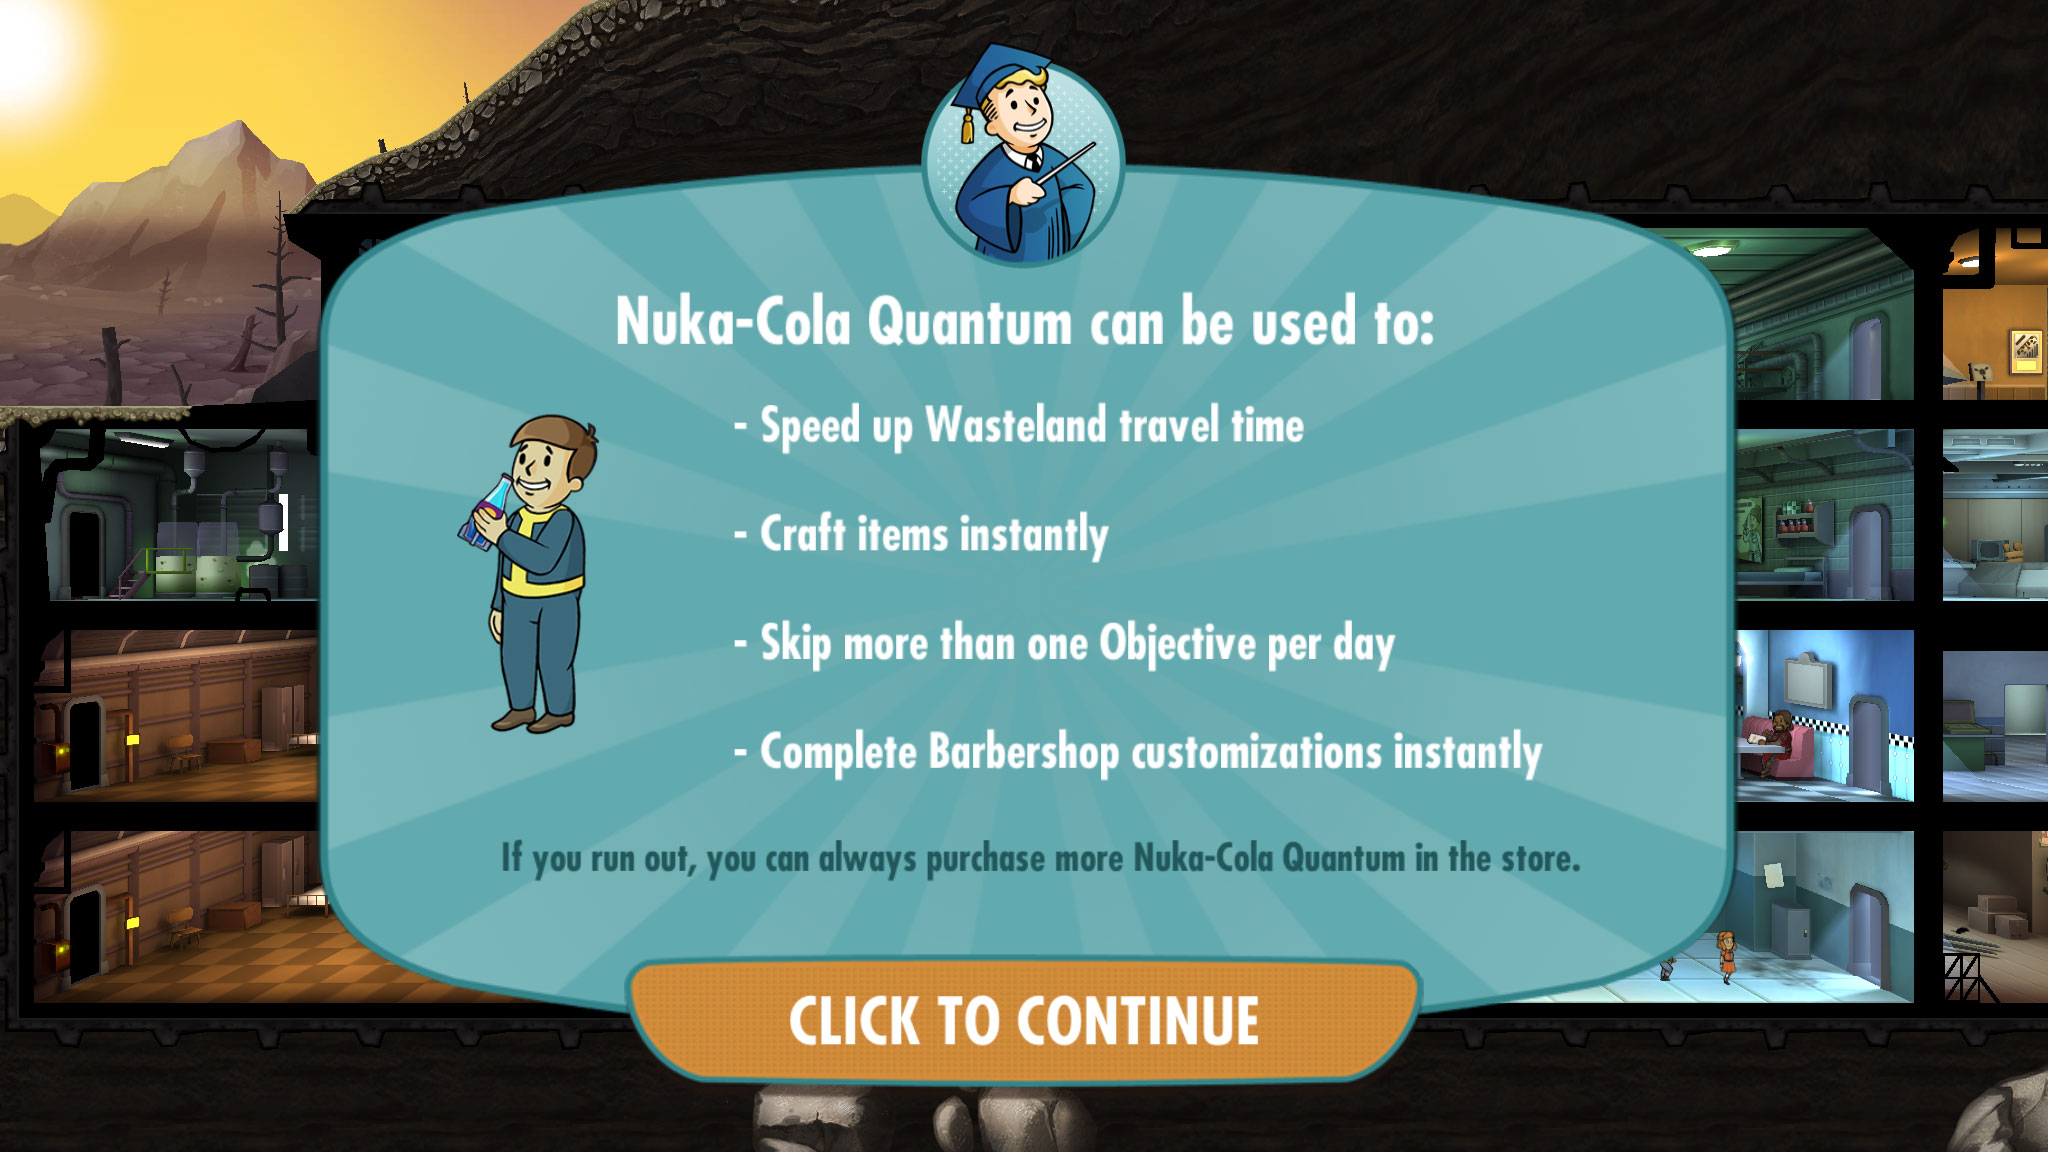 how to play fallout shelter on pc